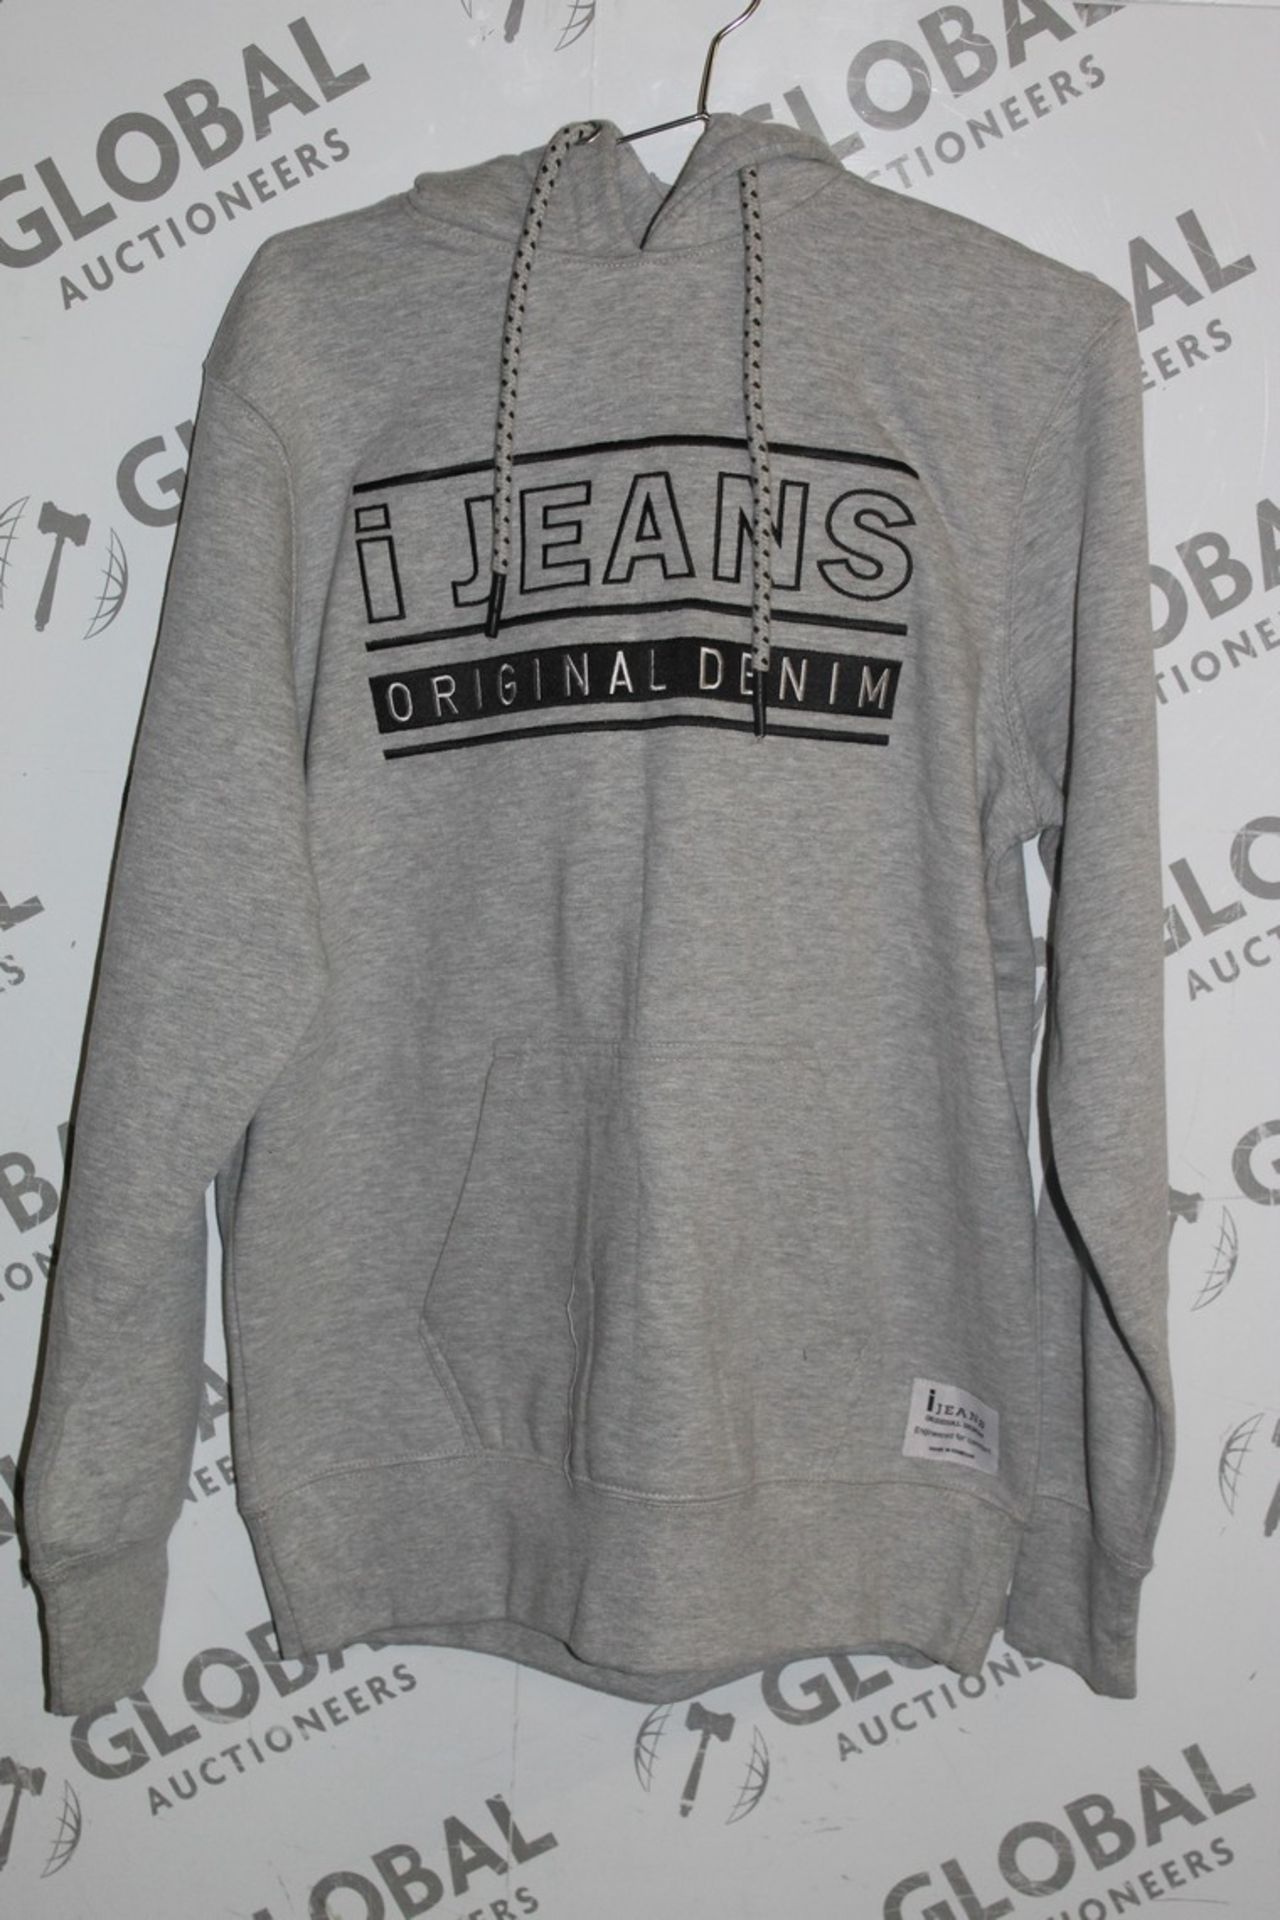 Box to Contain 6 Brand New IJEans Original Denim Gents Light Grey Designer Hooded Tops Combined